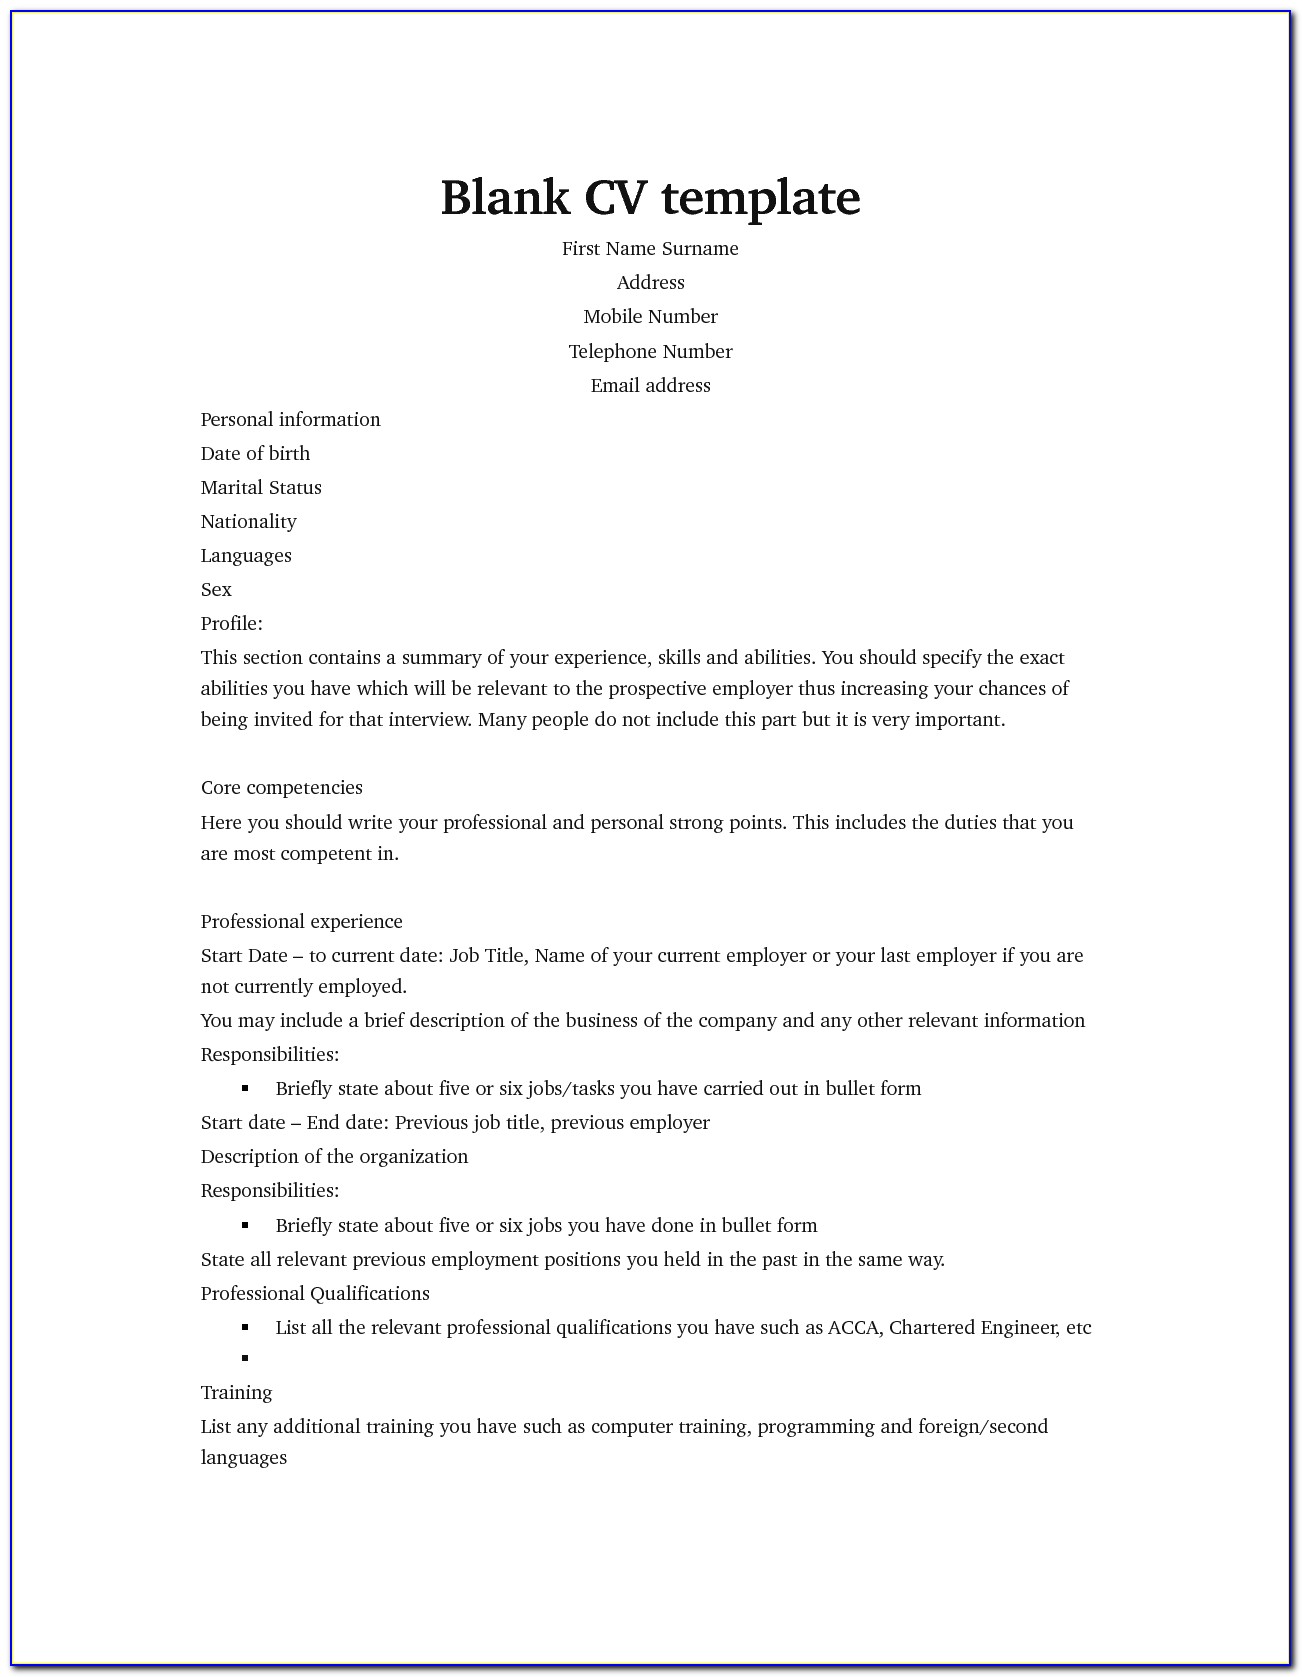 Resume Template : Builder No Cost Database Design In 85 Astounding Within Free Resume Database For Recruiters